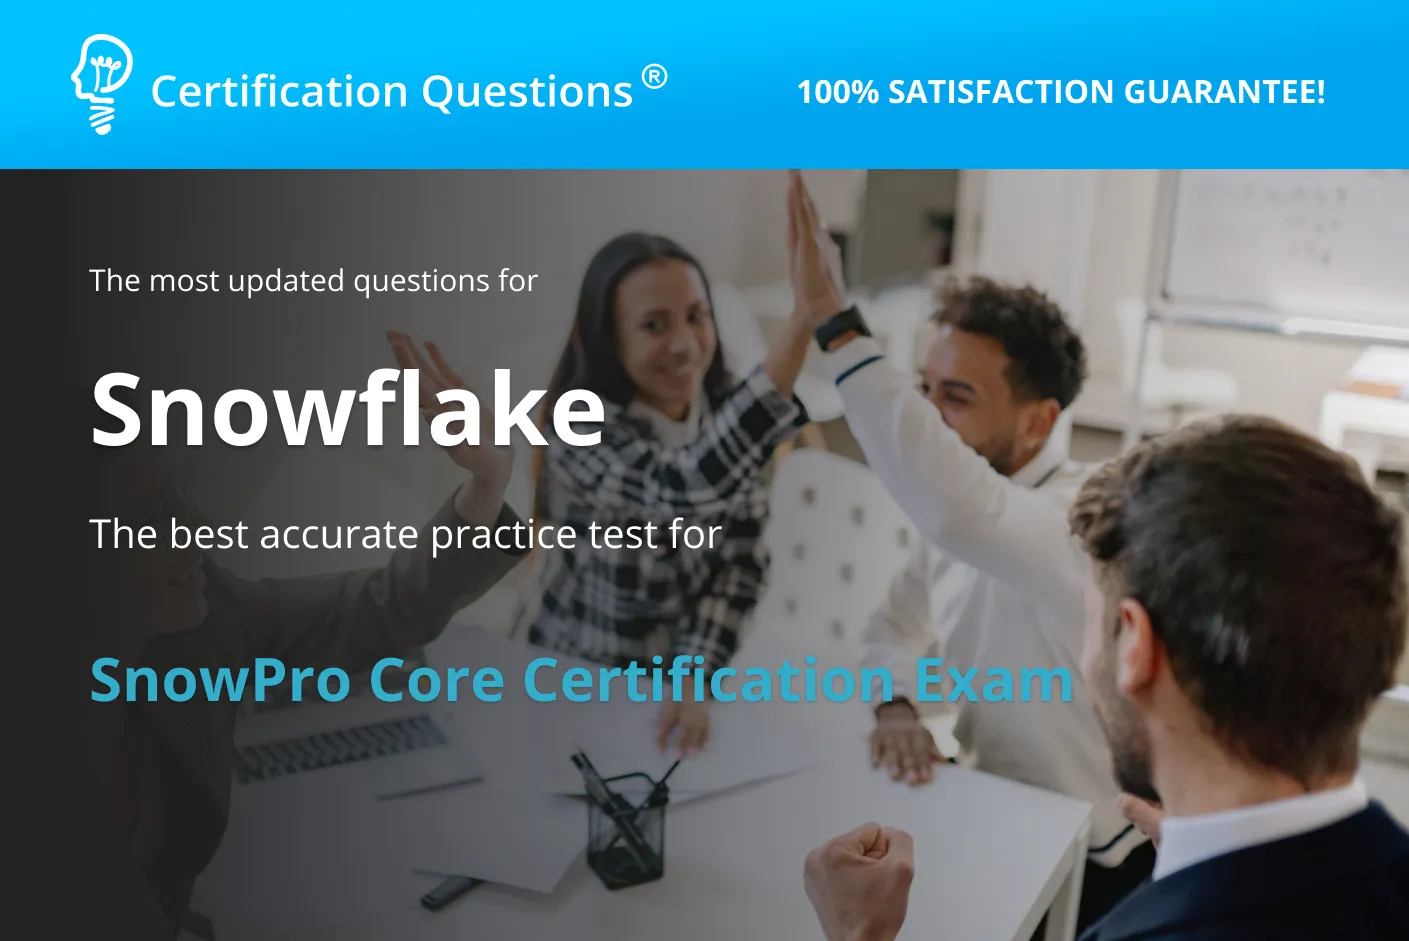 Here is the image for the SnowPro core certification practice test in the United States of America